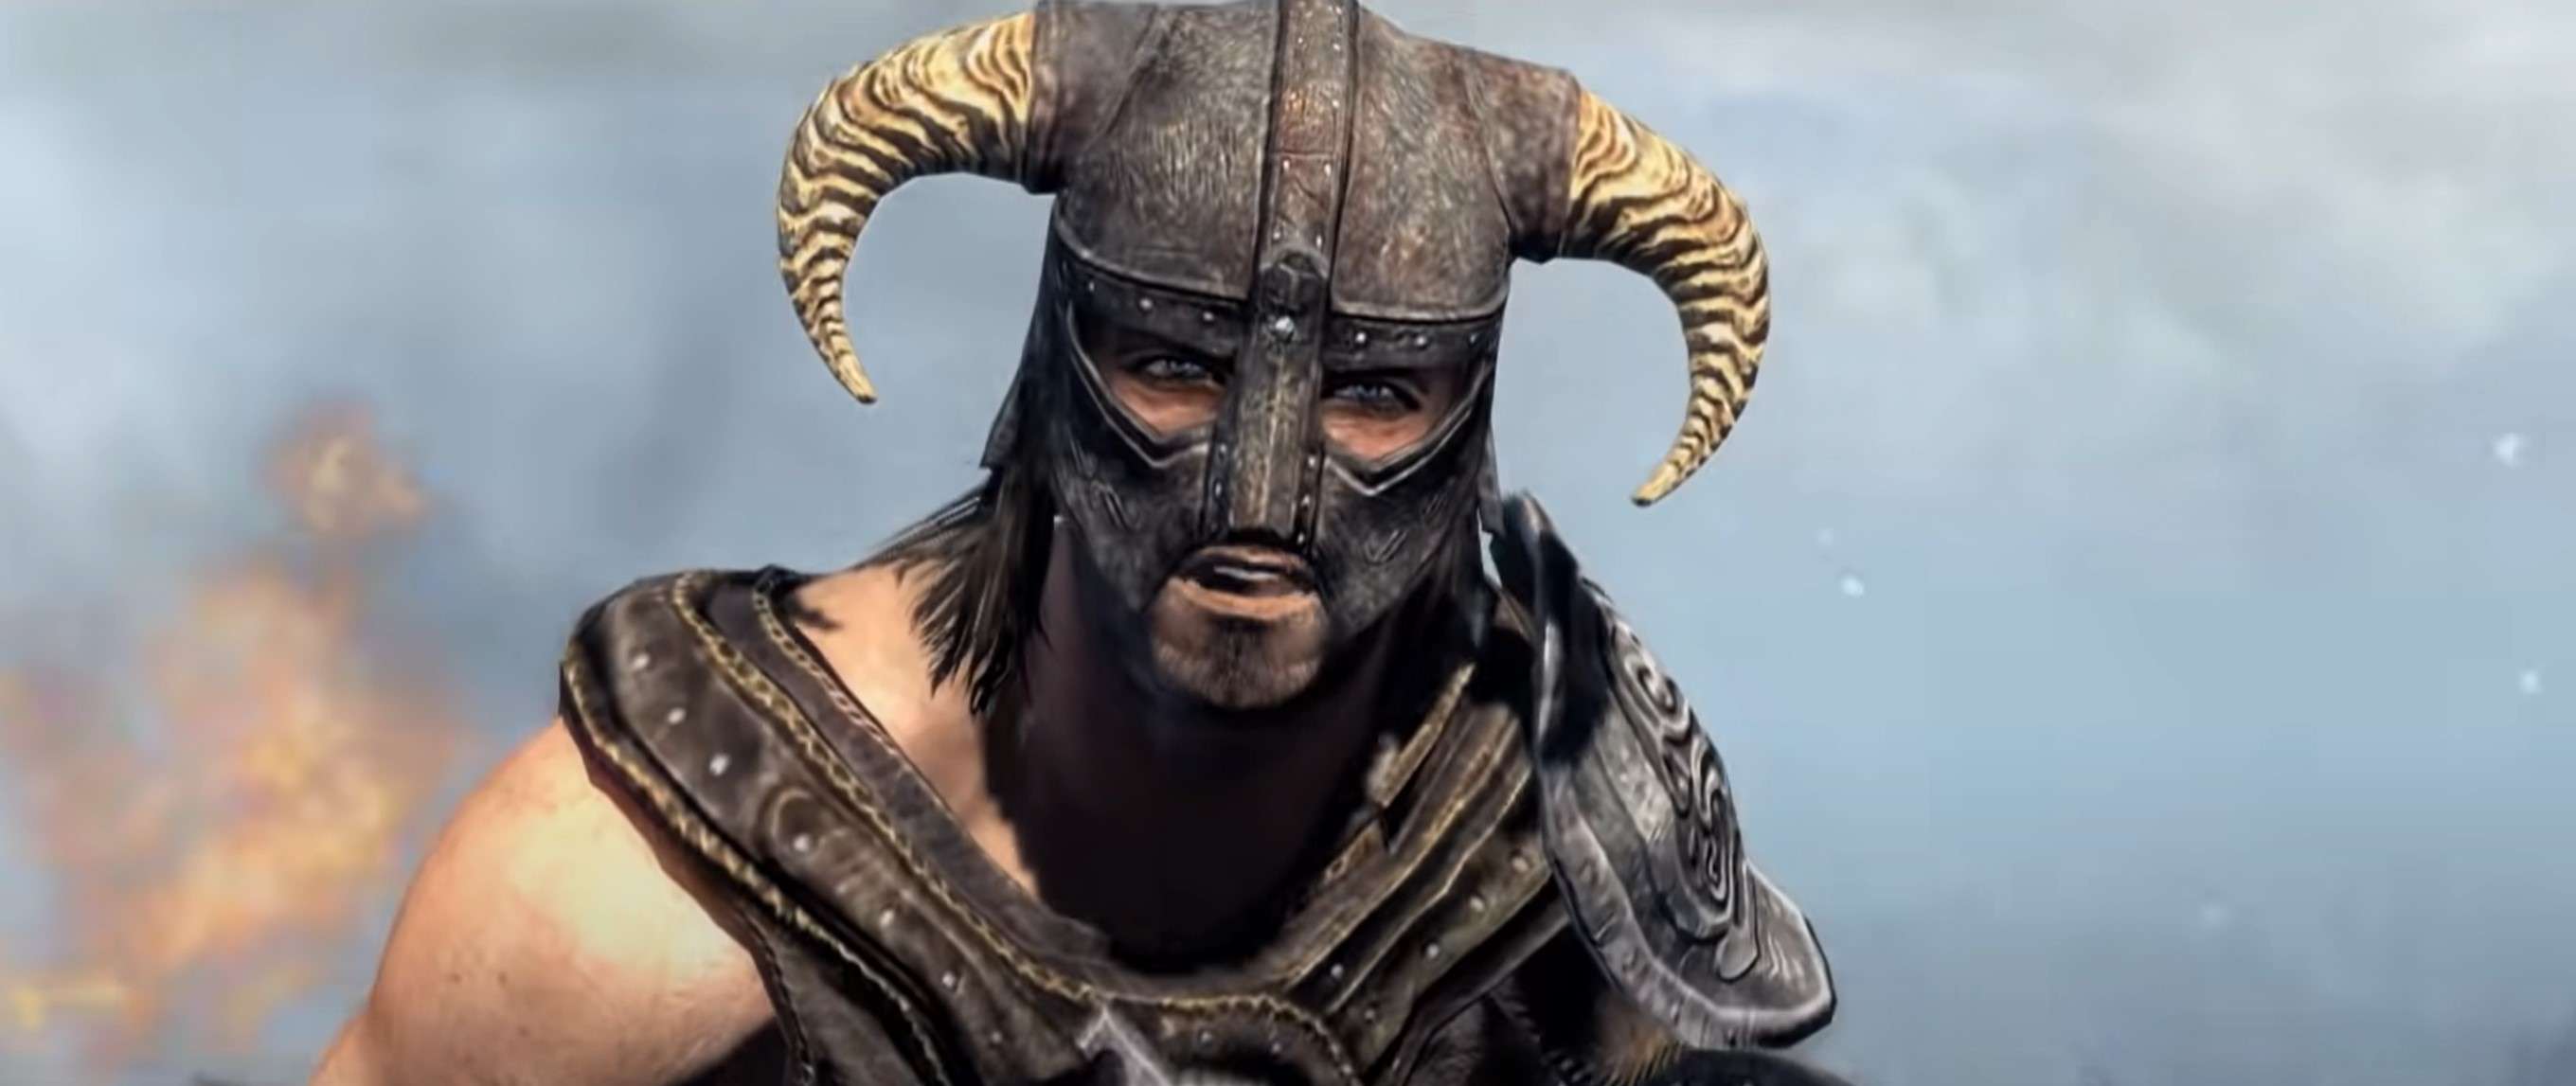 Today marks the two year anniversary of the elder scrolls 6 teaser